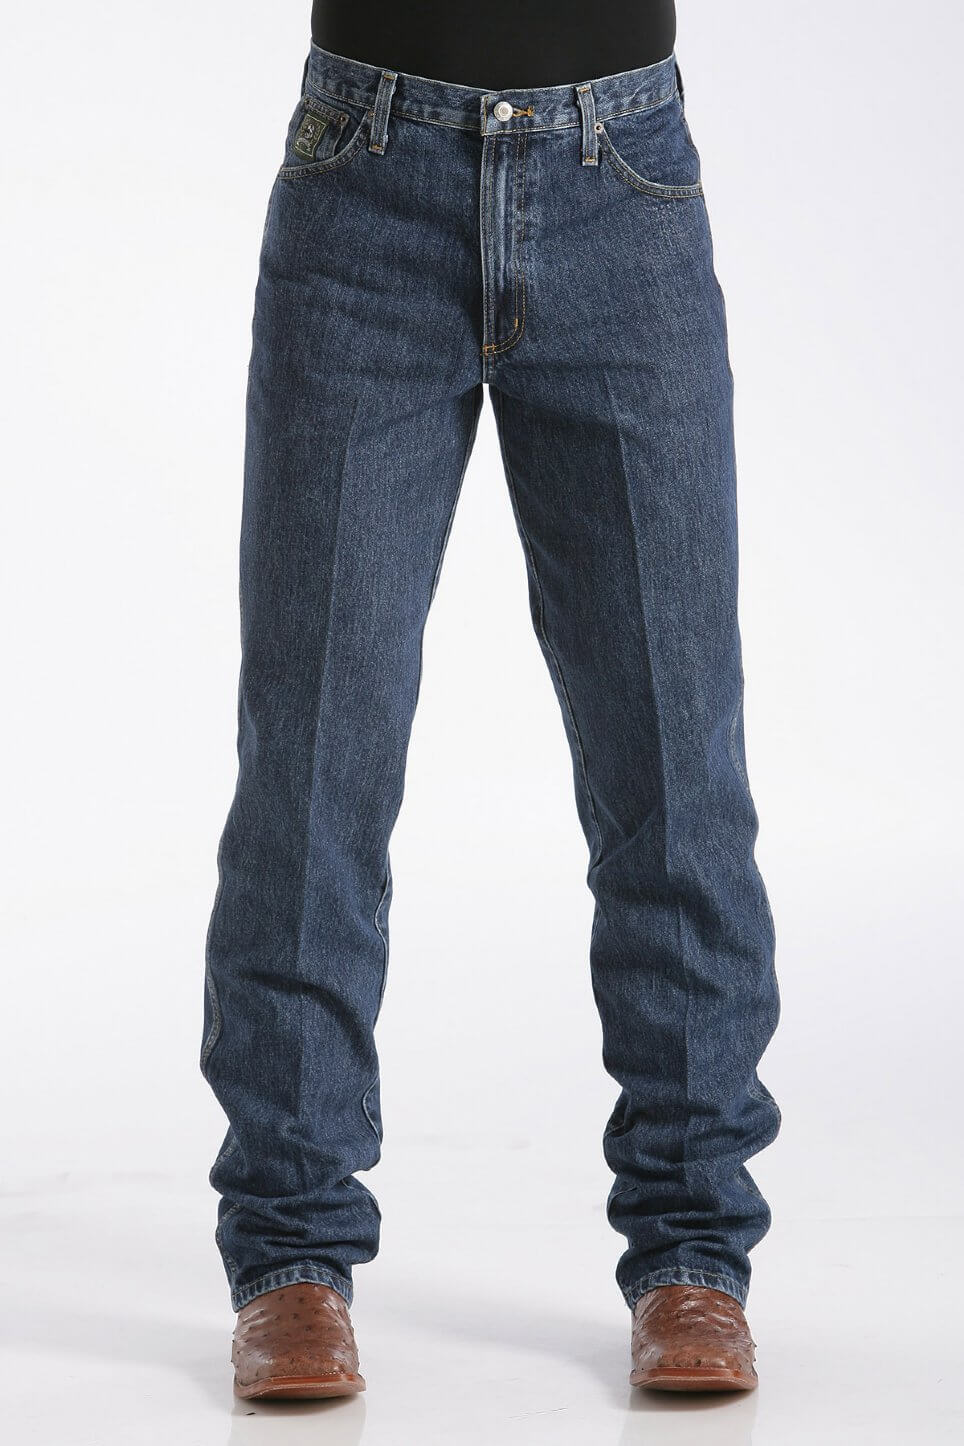 Cinch - Green Label Mens Relaxed Fit Jeans